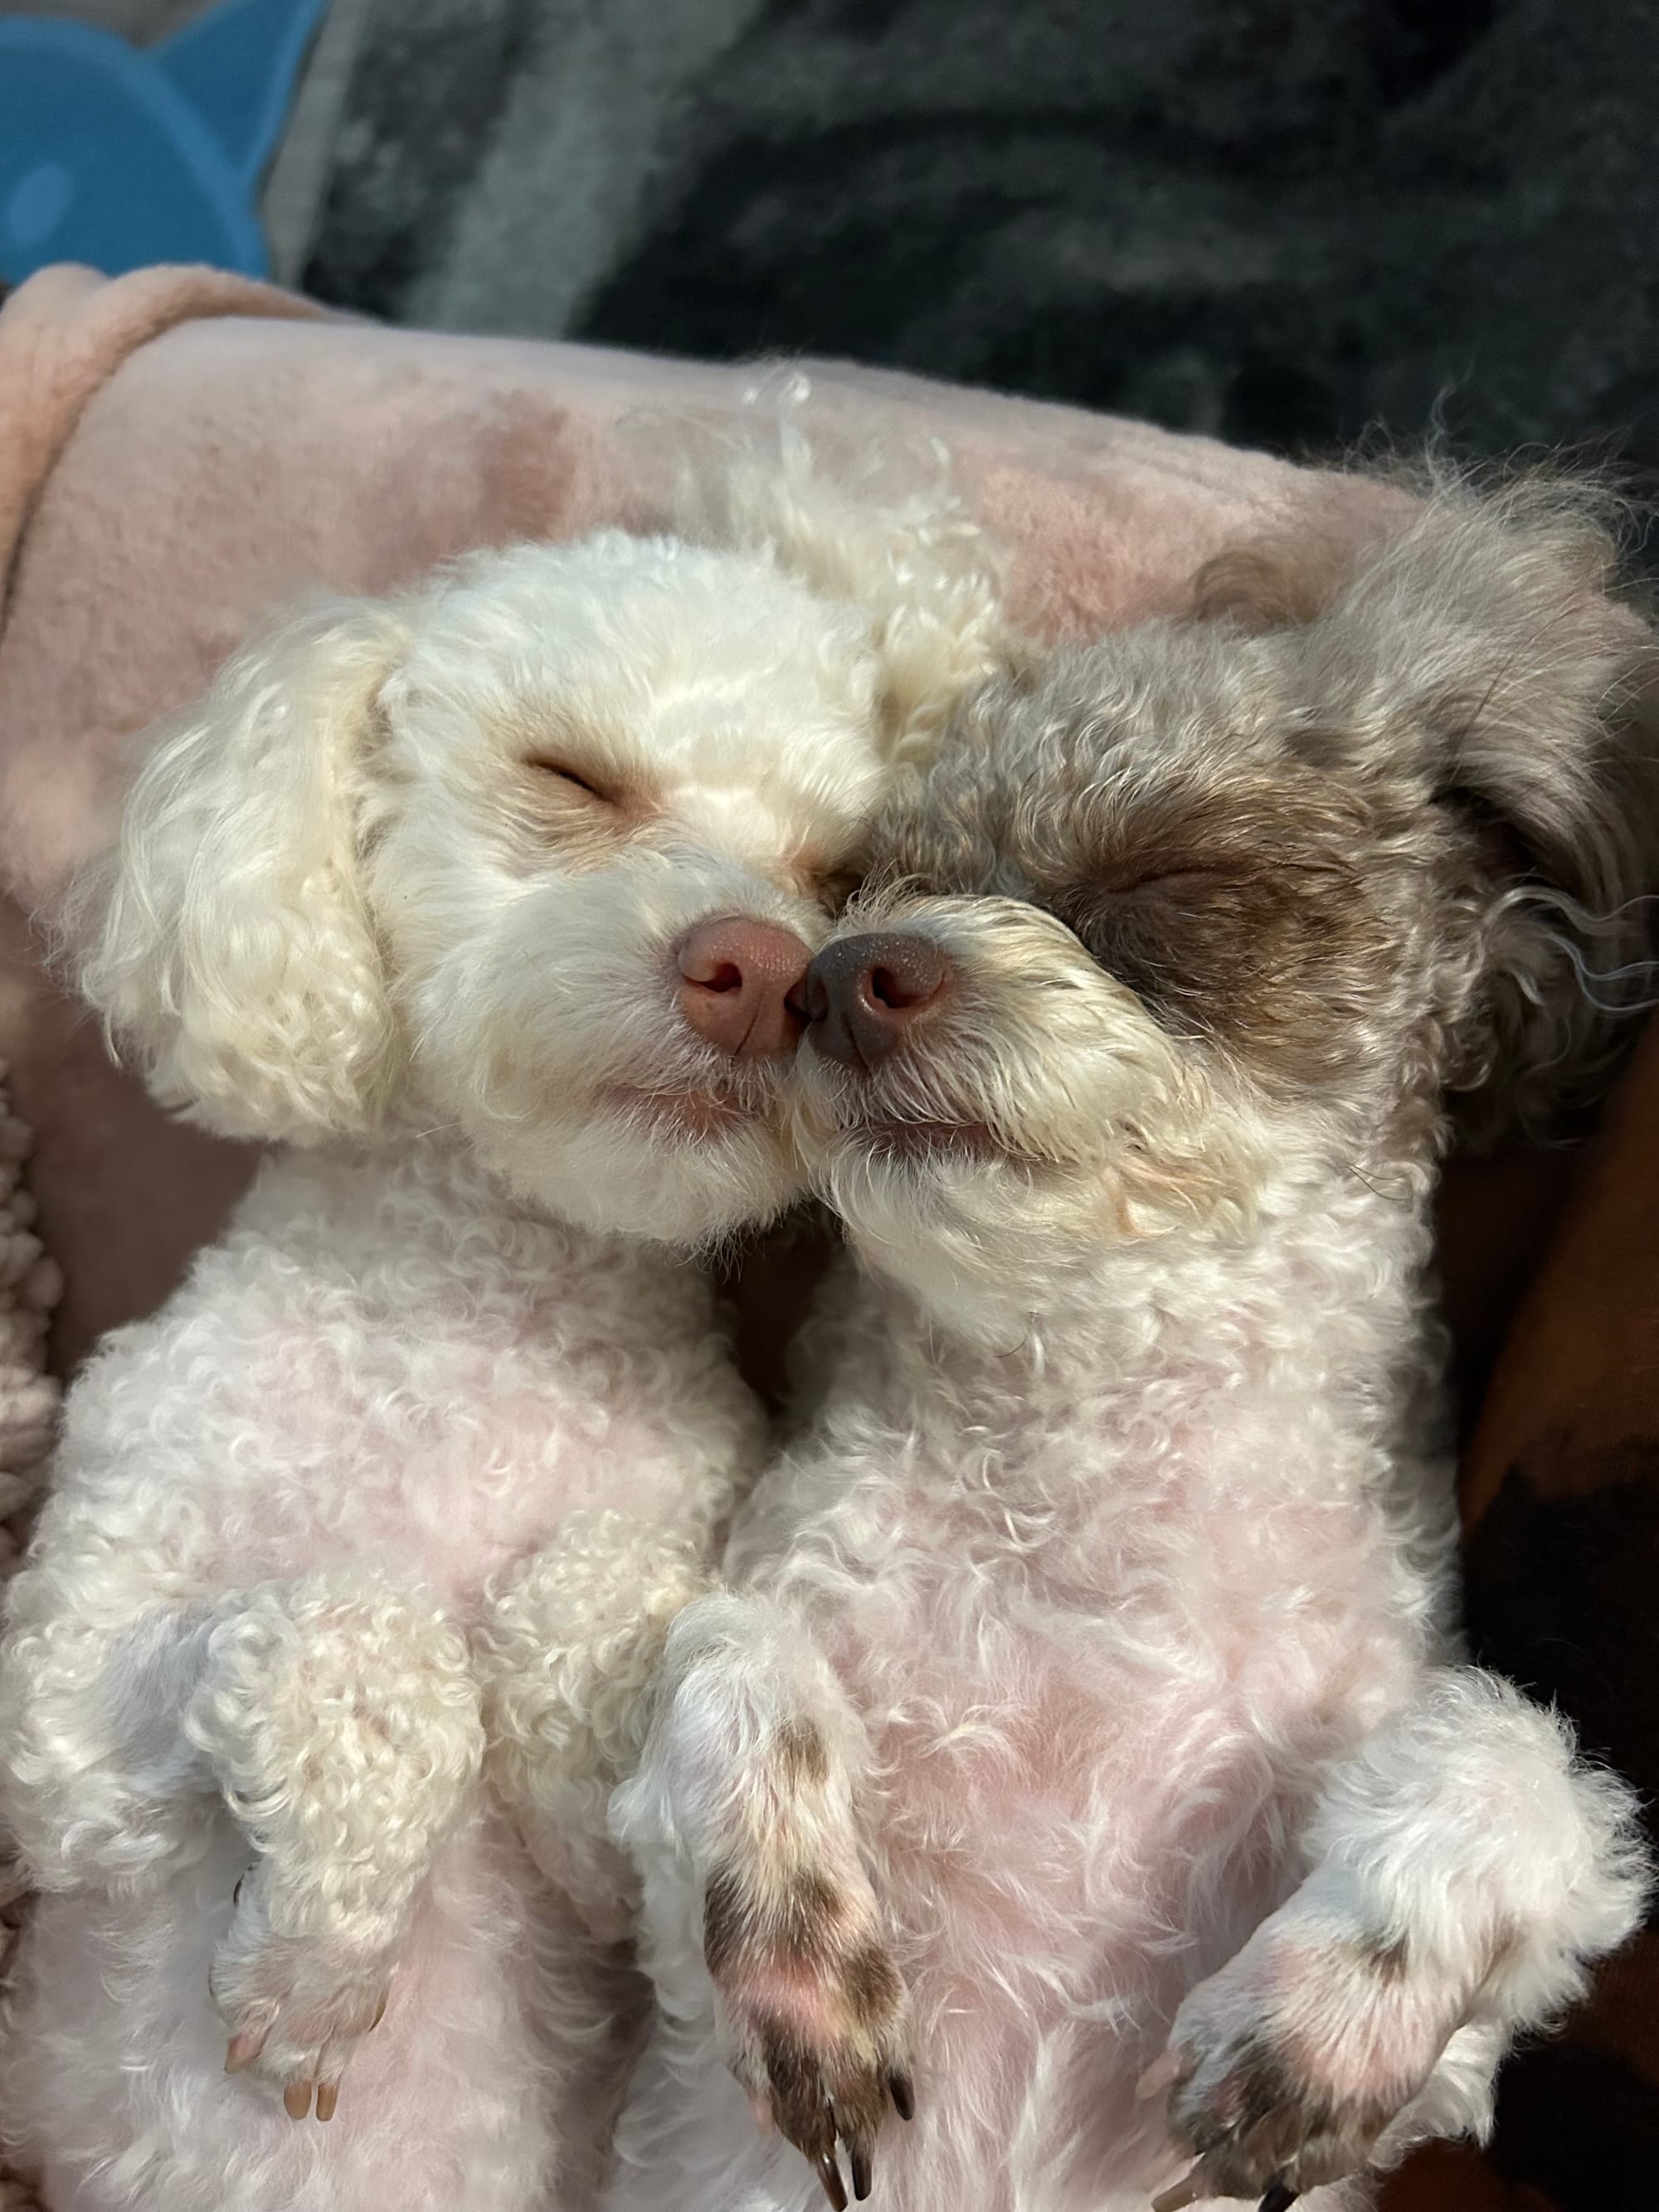 DOGFLUENCERS: Meet Moon & Olivia, The Iconic Toy Poodle Duo